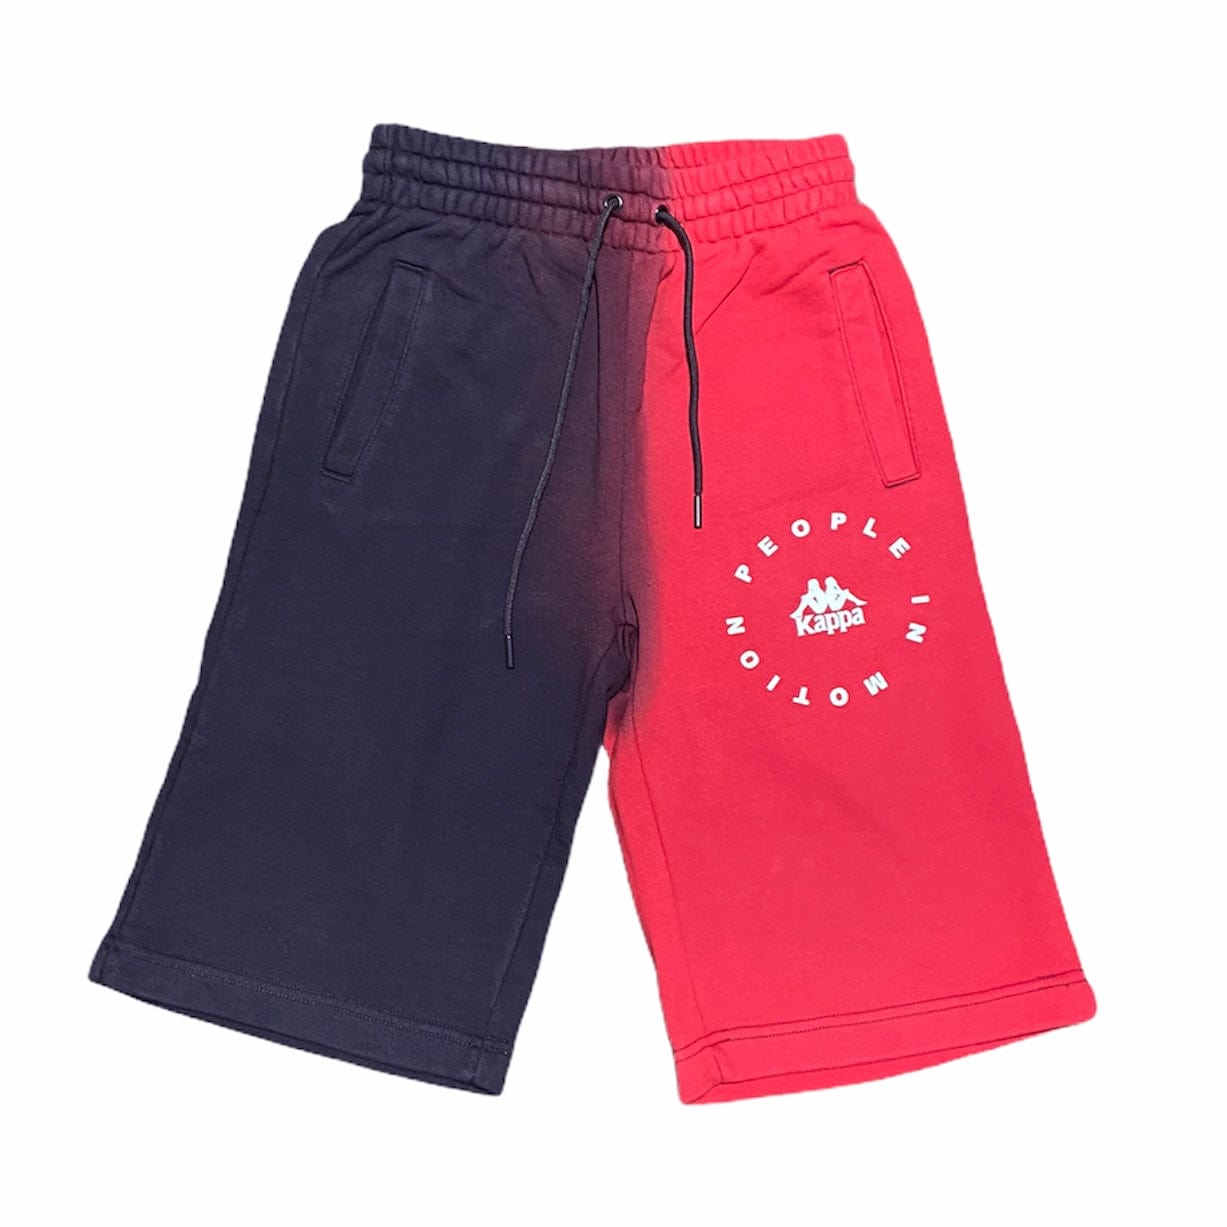 City – USA Man Shorts - (Red/Blue/White) 36161CW Authentic Kappa Berrie